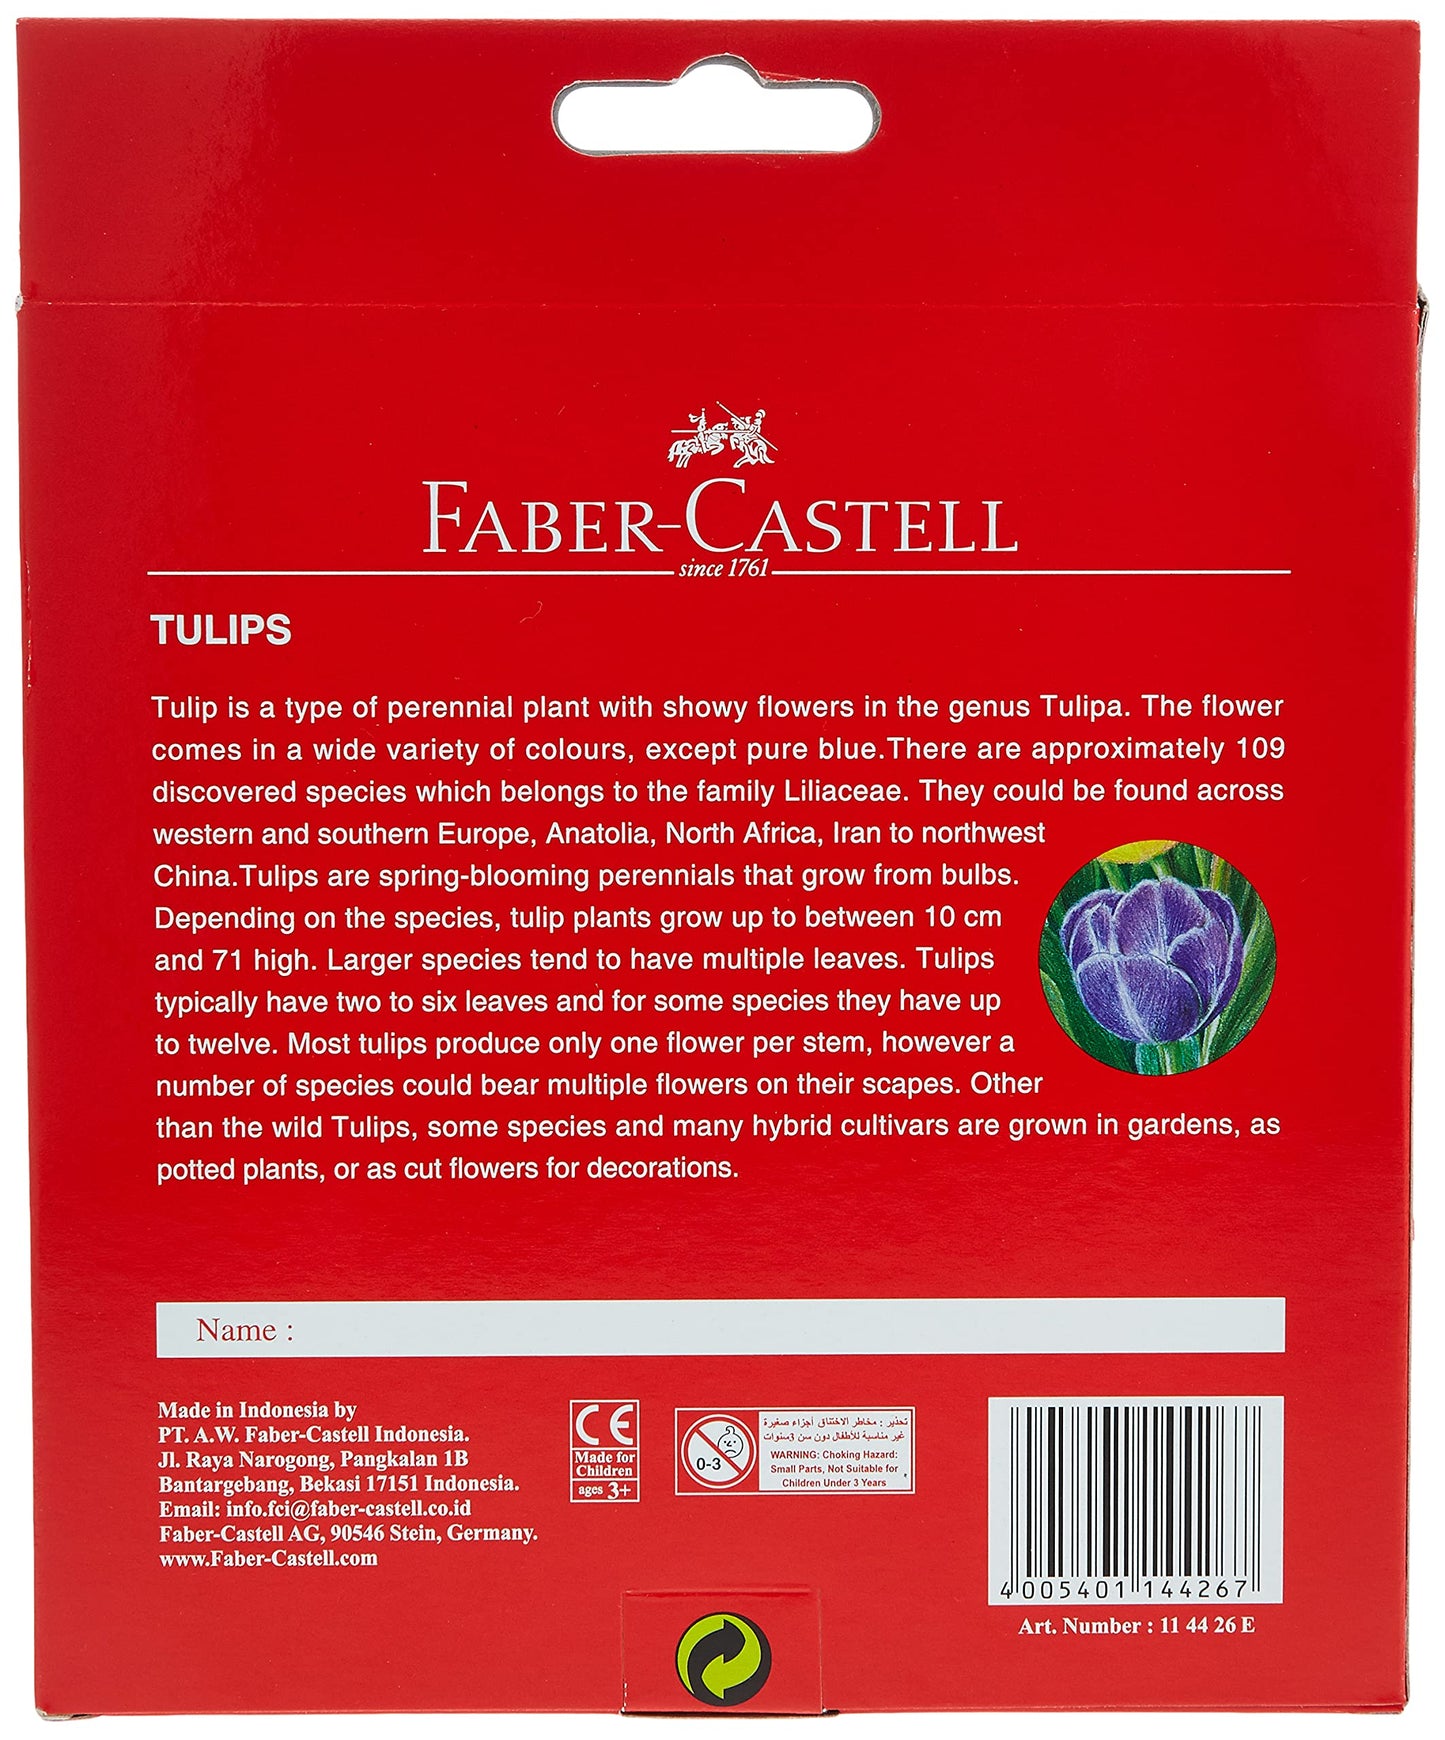 Faber-Castell COLOURS OF NATURE COLOUR PENCILS 24 COLOUR IN A CARDBOARD BOX,Assorted designs, 114426